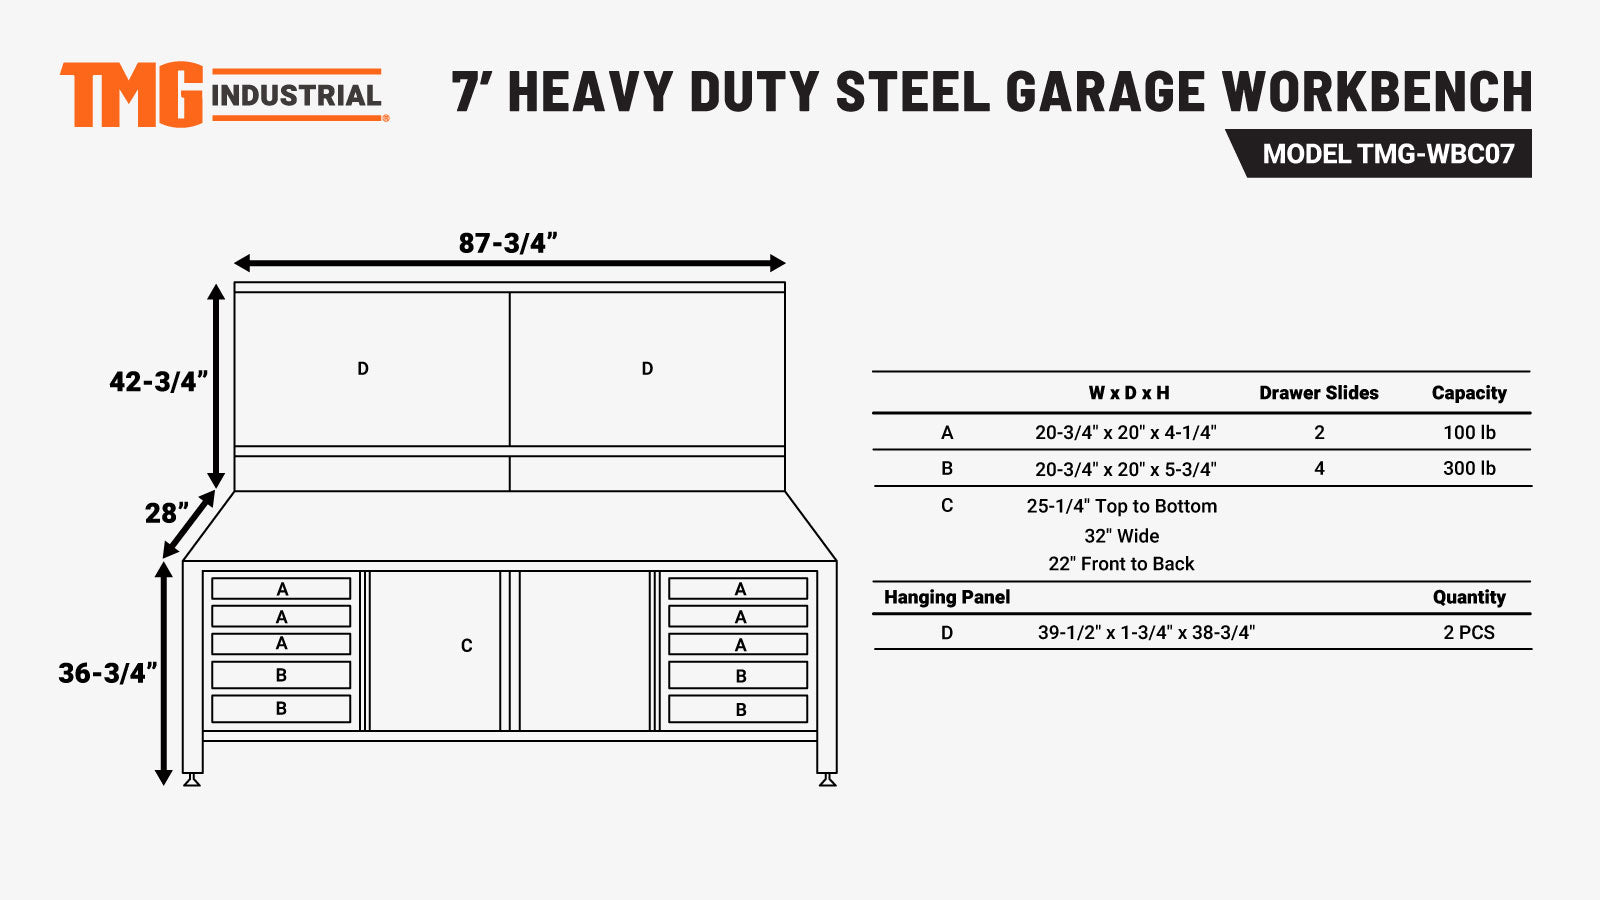 TMG Industrial 7’ Extreme Duty Steel Garage Workbench w/Pegboards, Adjustable Shelving, Power Outlets, USB Port, Magnetic Motion LED Lamps, TMG-WBC07-specifications-image